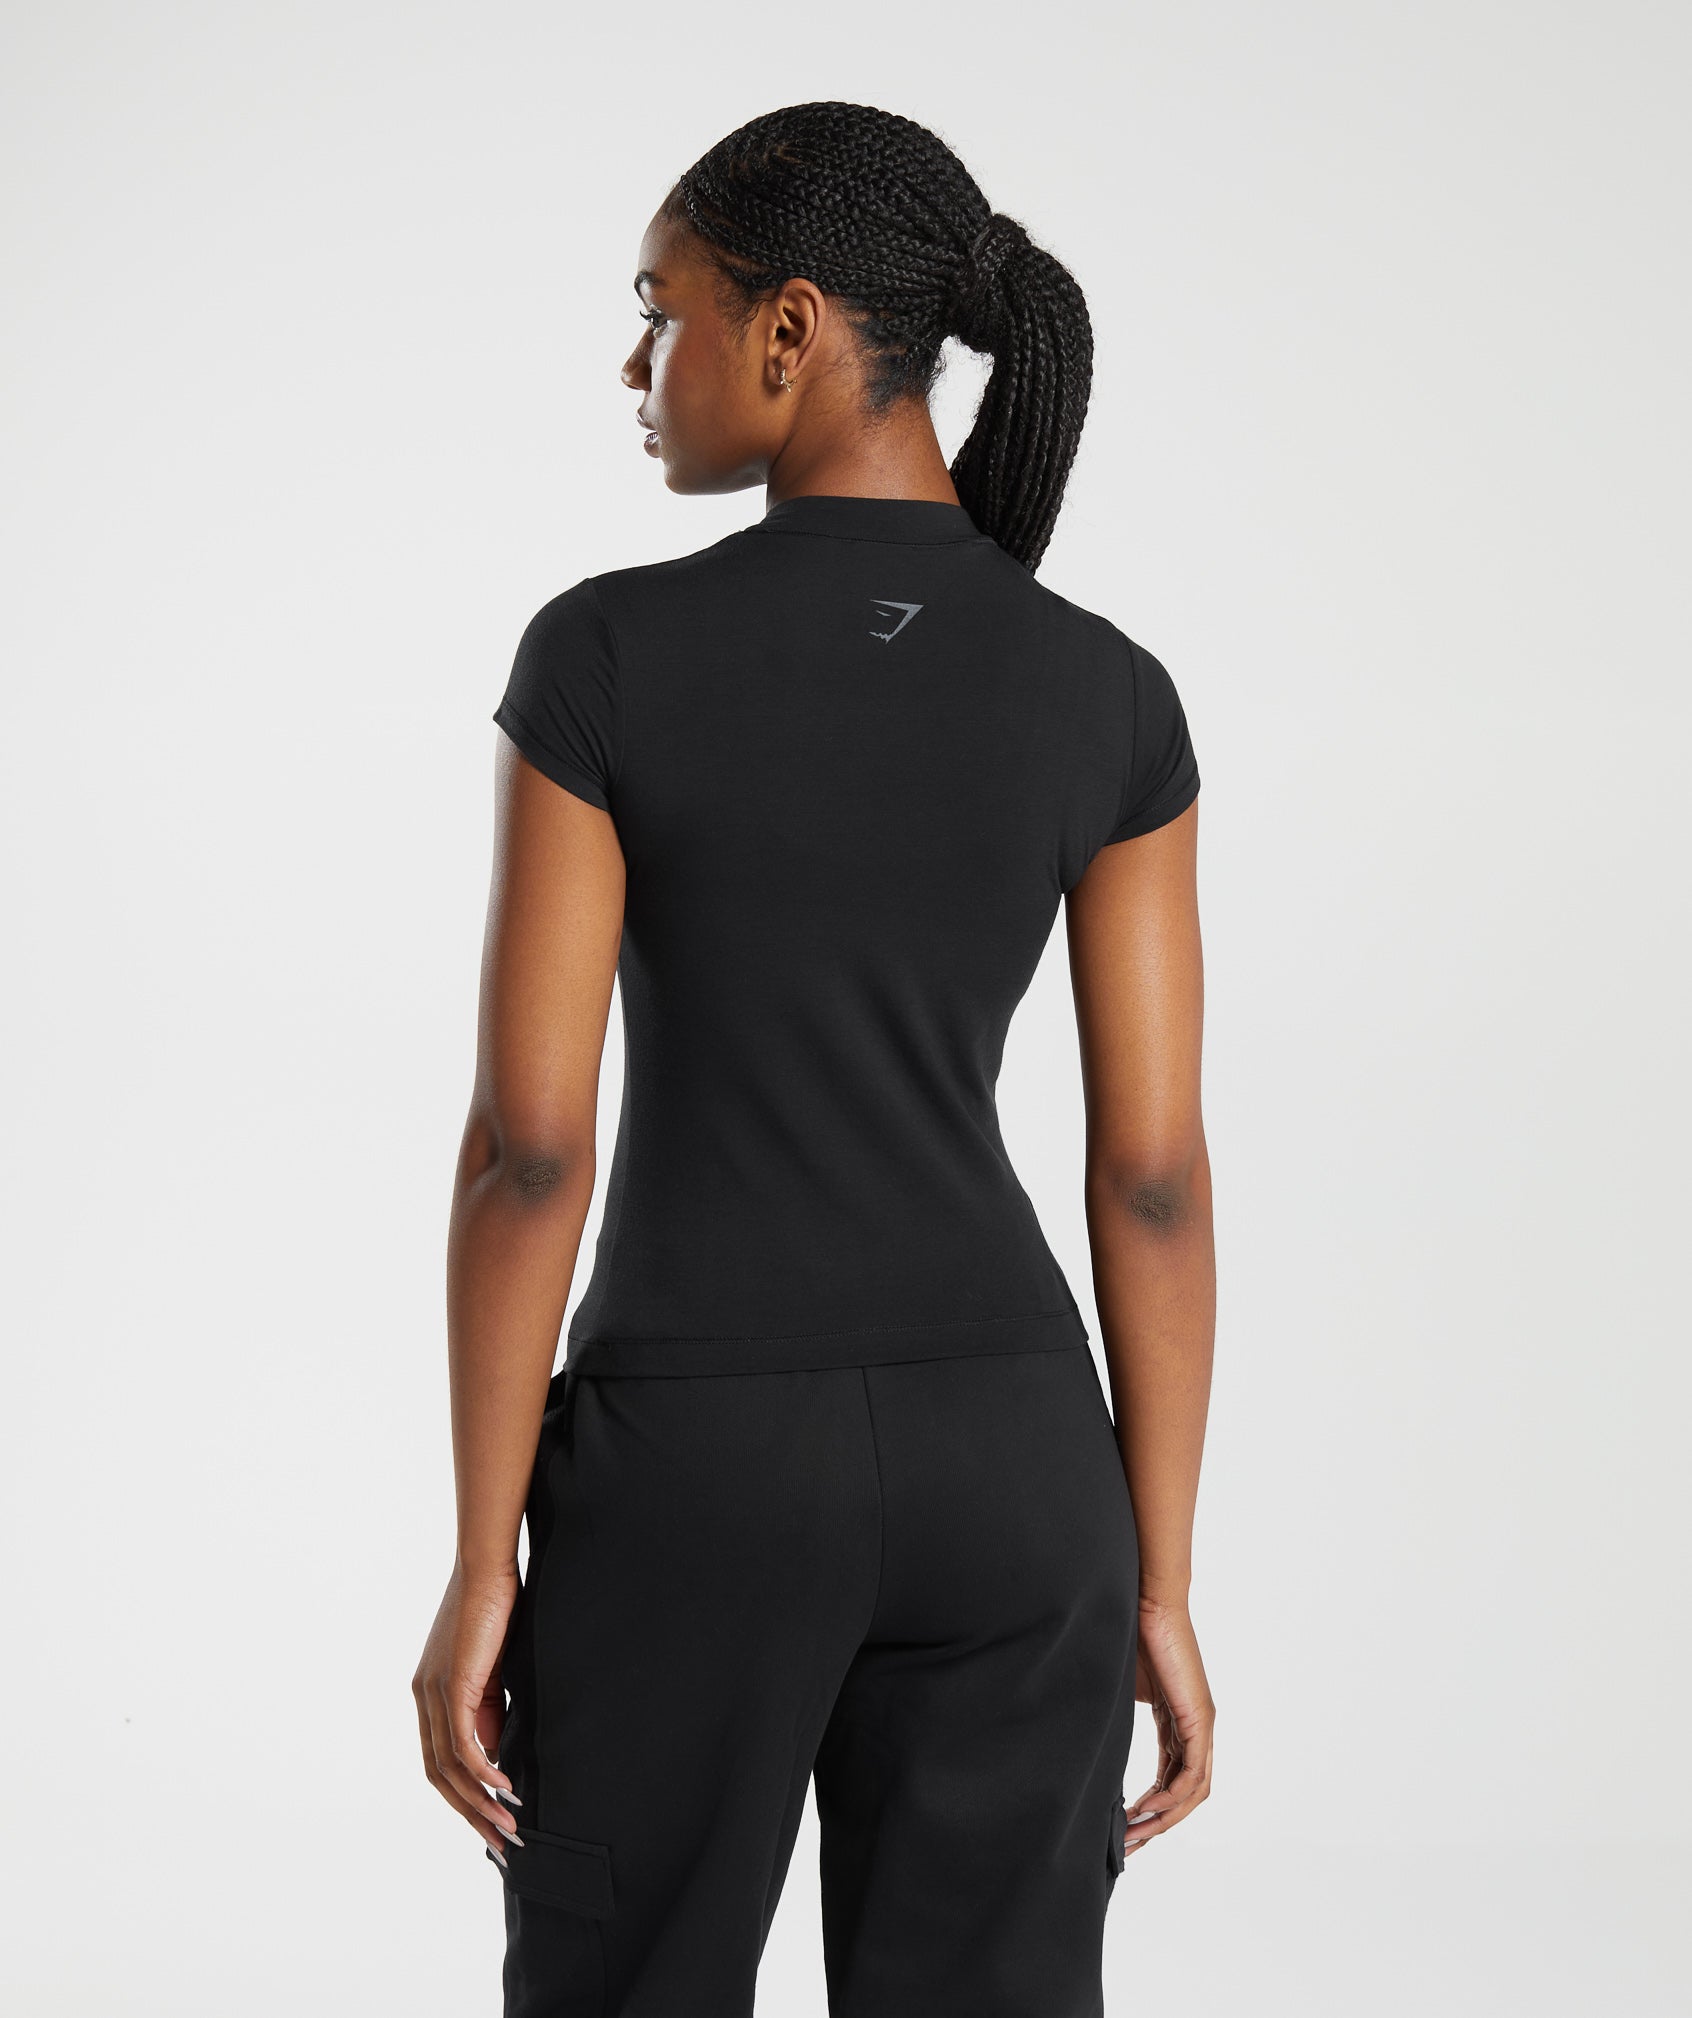 Phys Ed Graphic Body Fit T-Shirt in Black - view 3